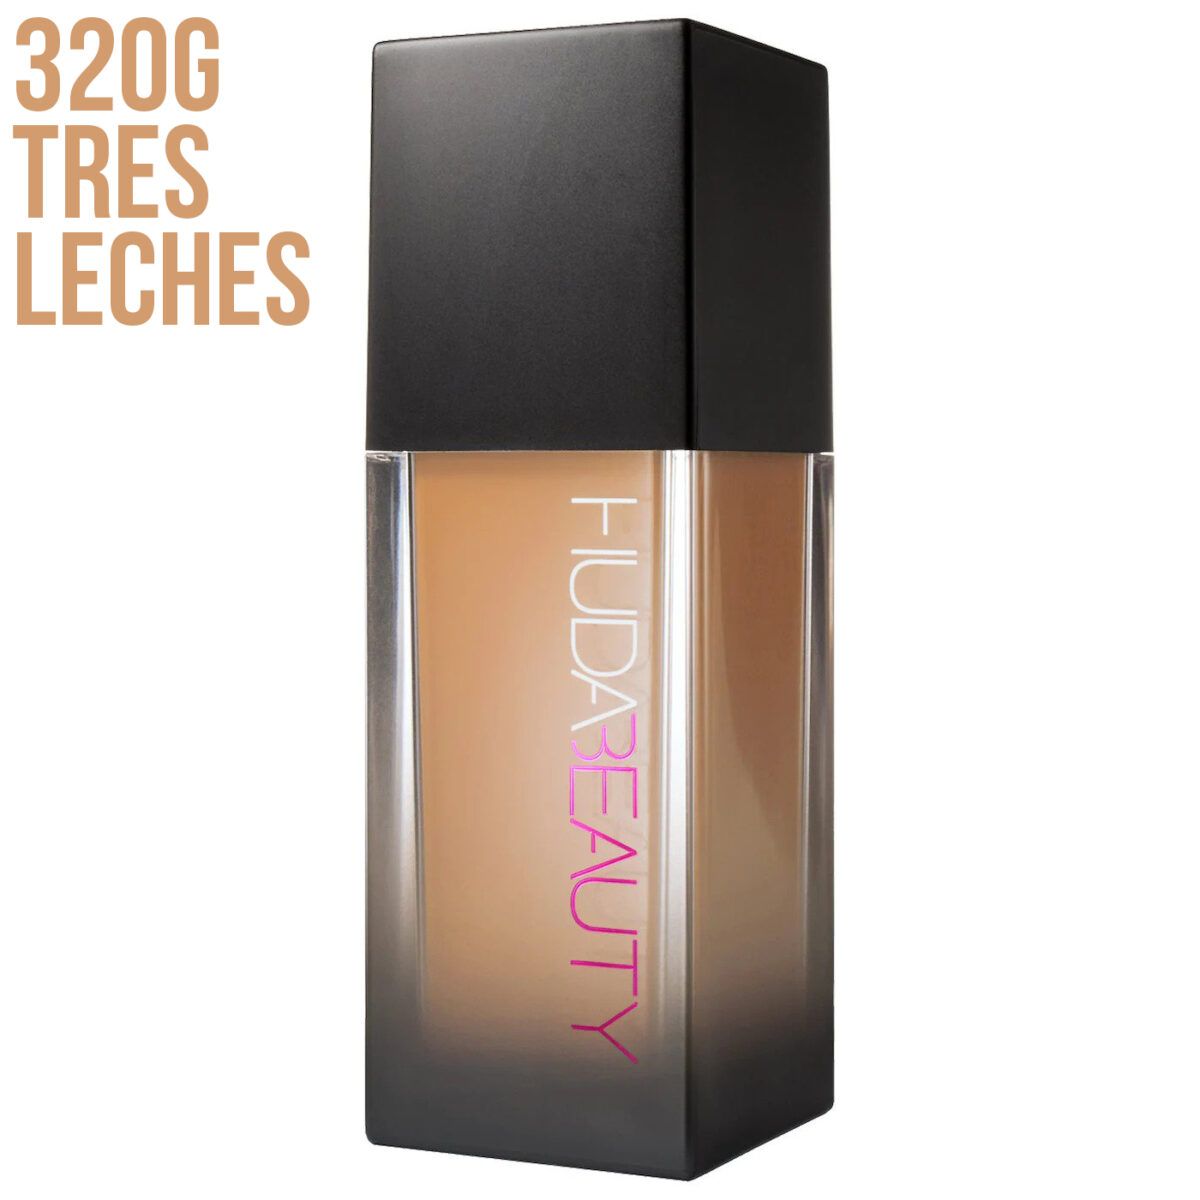 Huda Beauty 320G Tres Leches Faux Filter Foundation Dupes